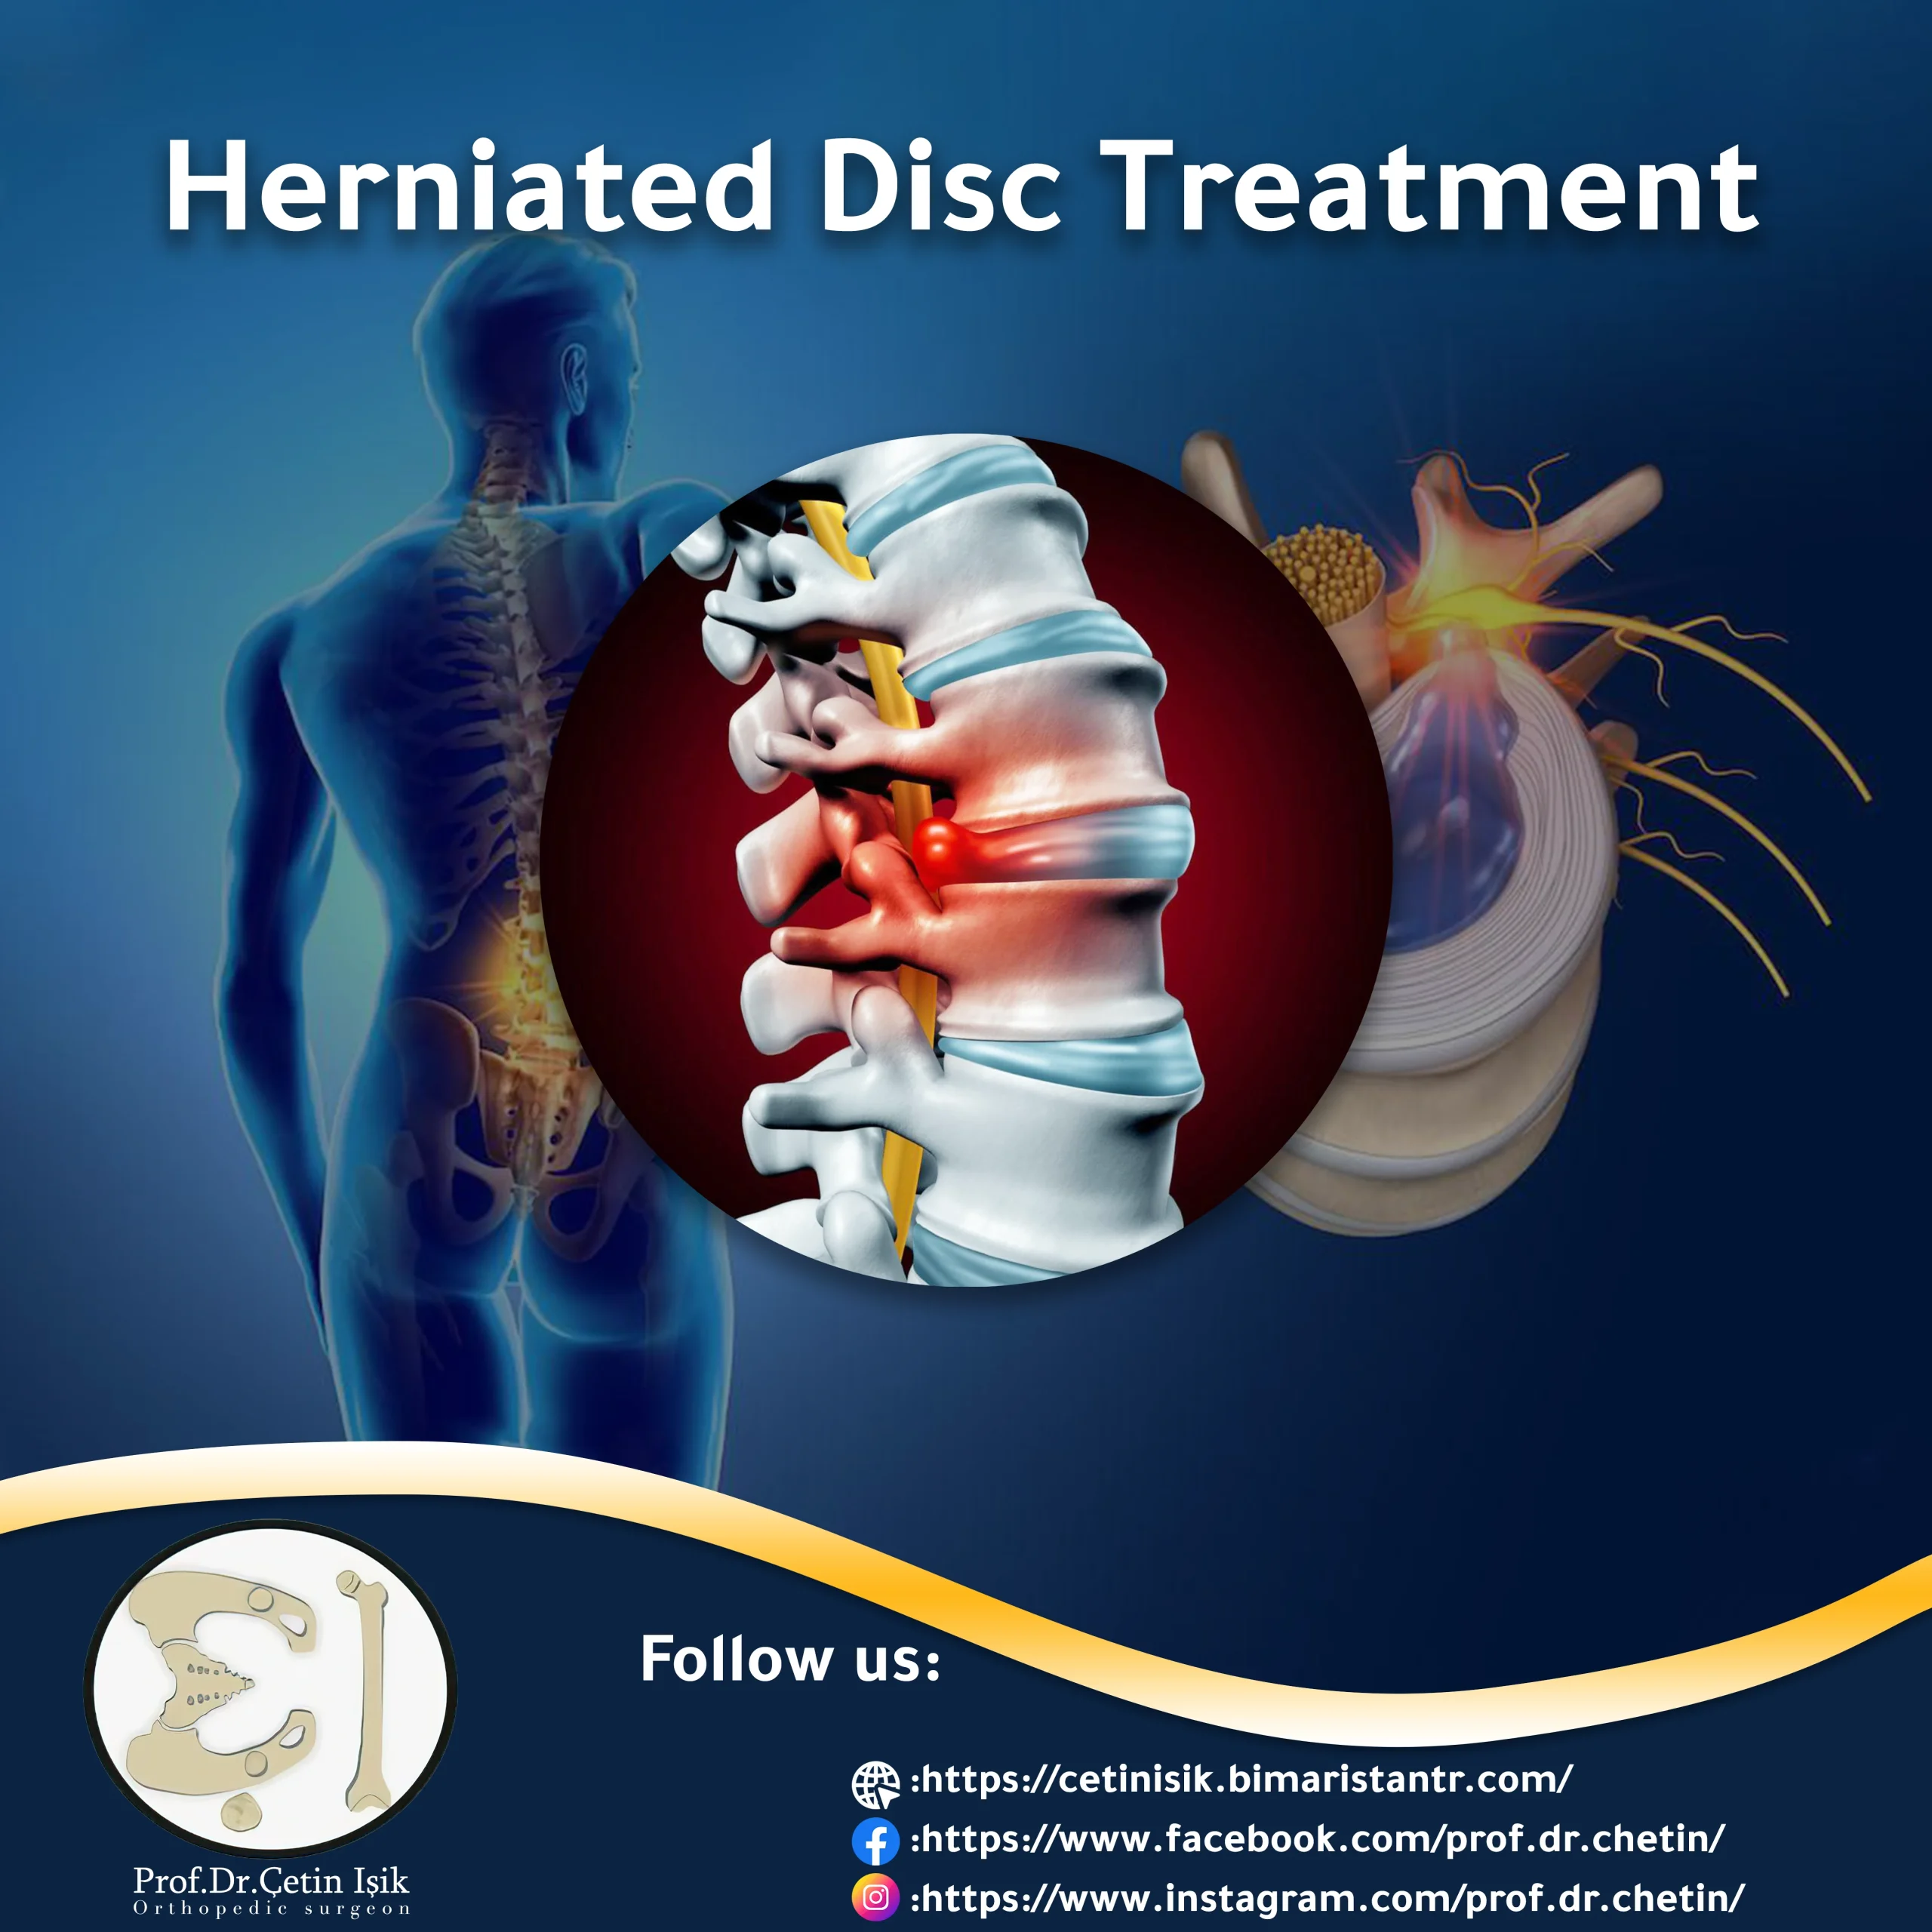 11 Various Treatment Options to Help with a Herniated Disk